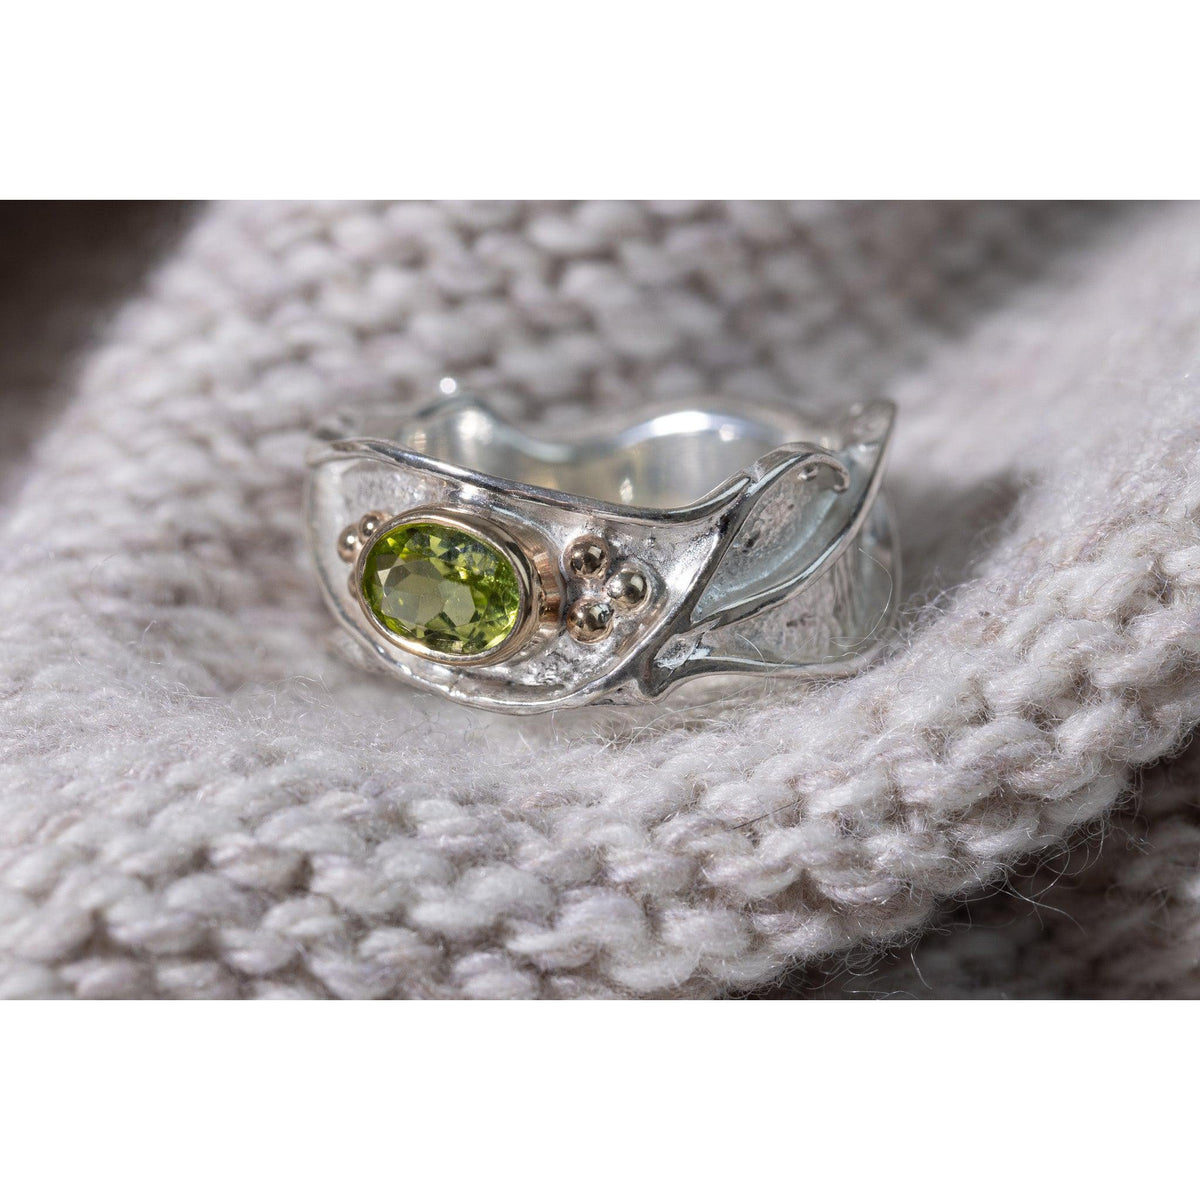 &#39;LG60 - Silver Ring with 9ct Gold 8x5 Peridot Ring &#39; by Les Grimshaw, available at Padstow Gallery, Cornwall